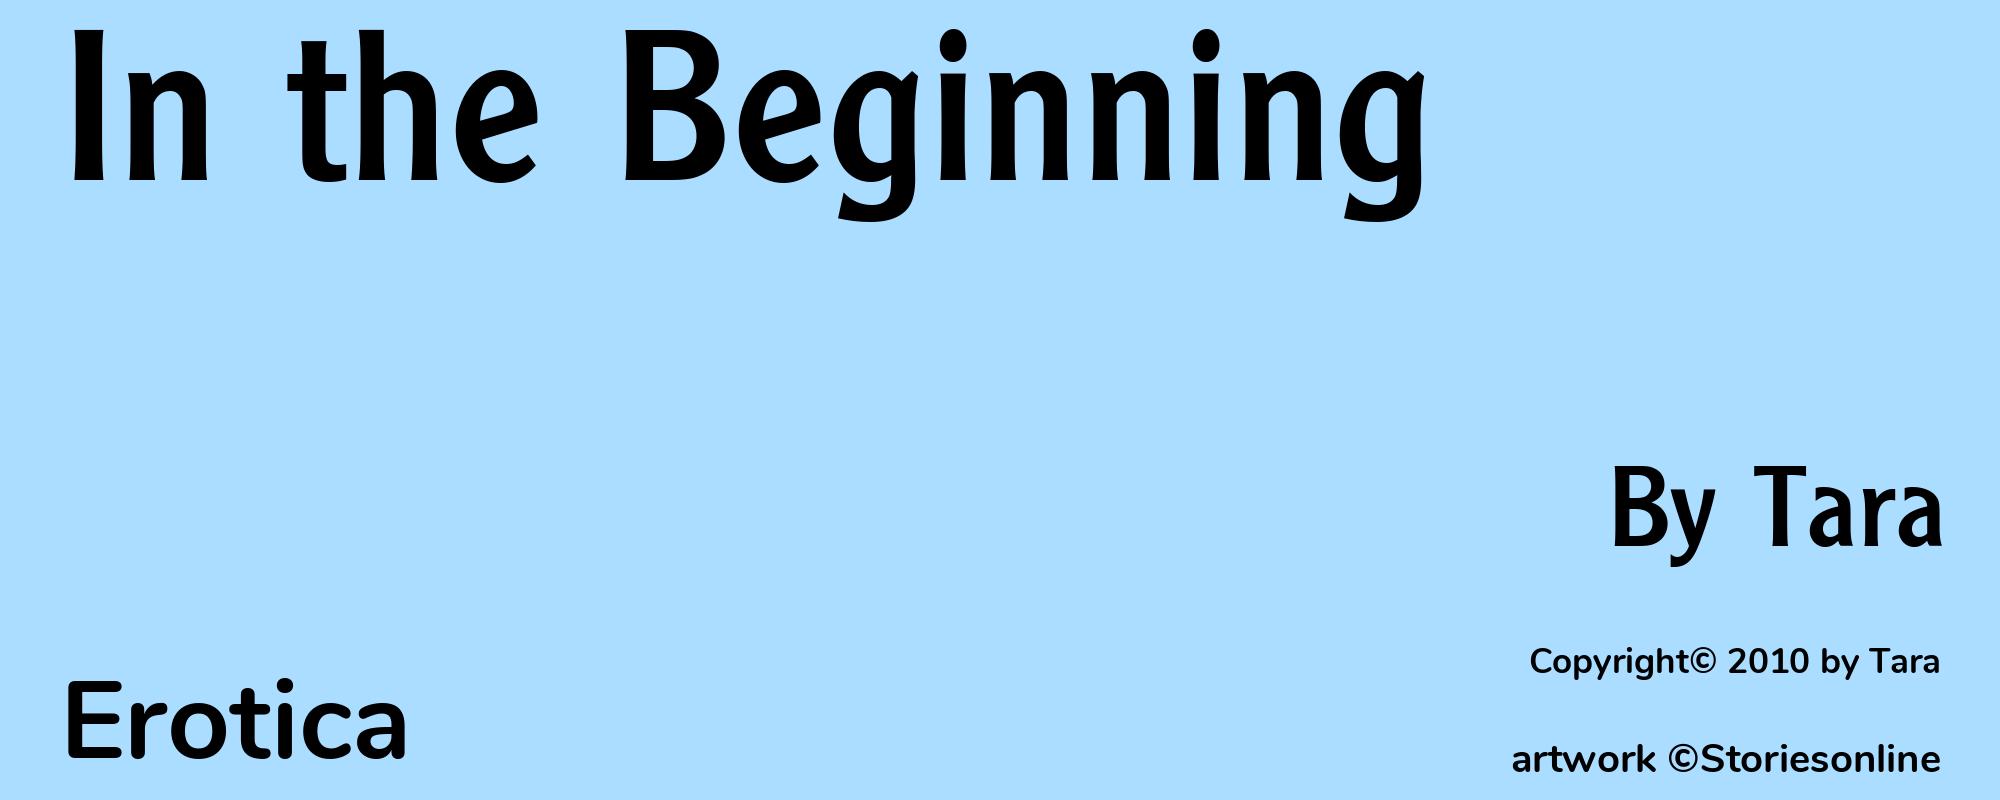 In the Beginning - Cover